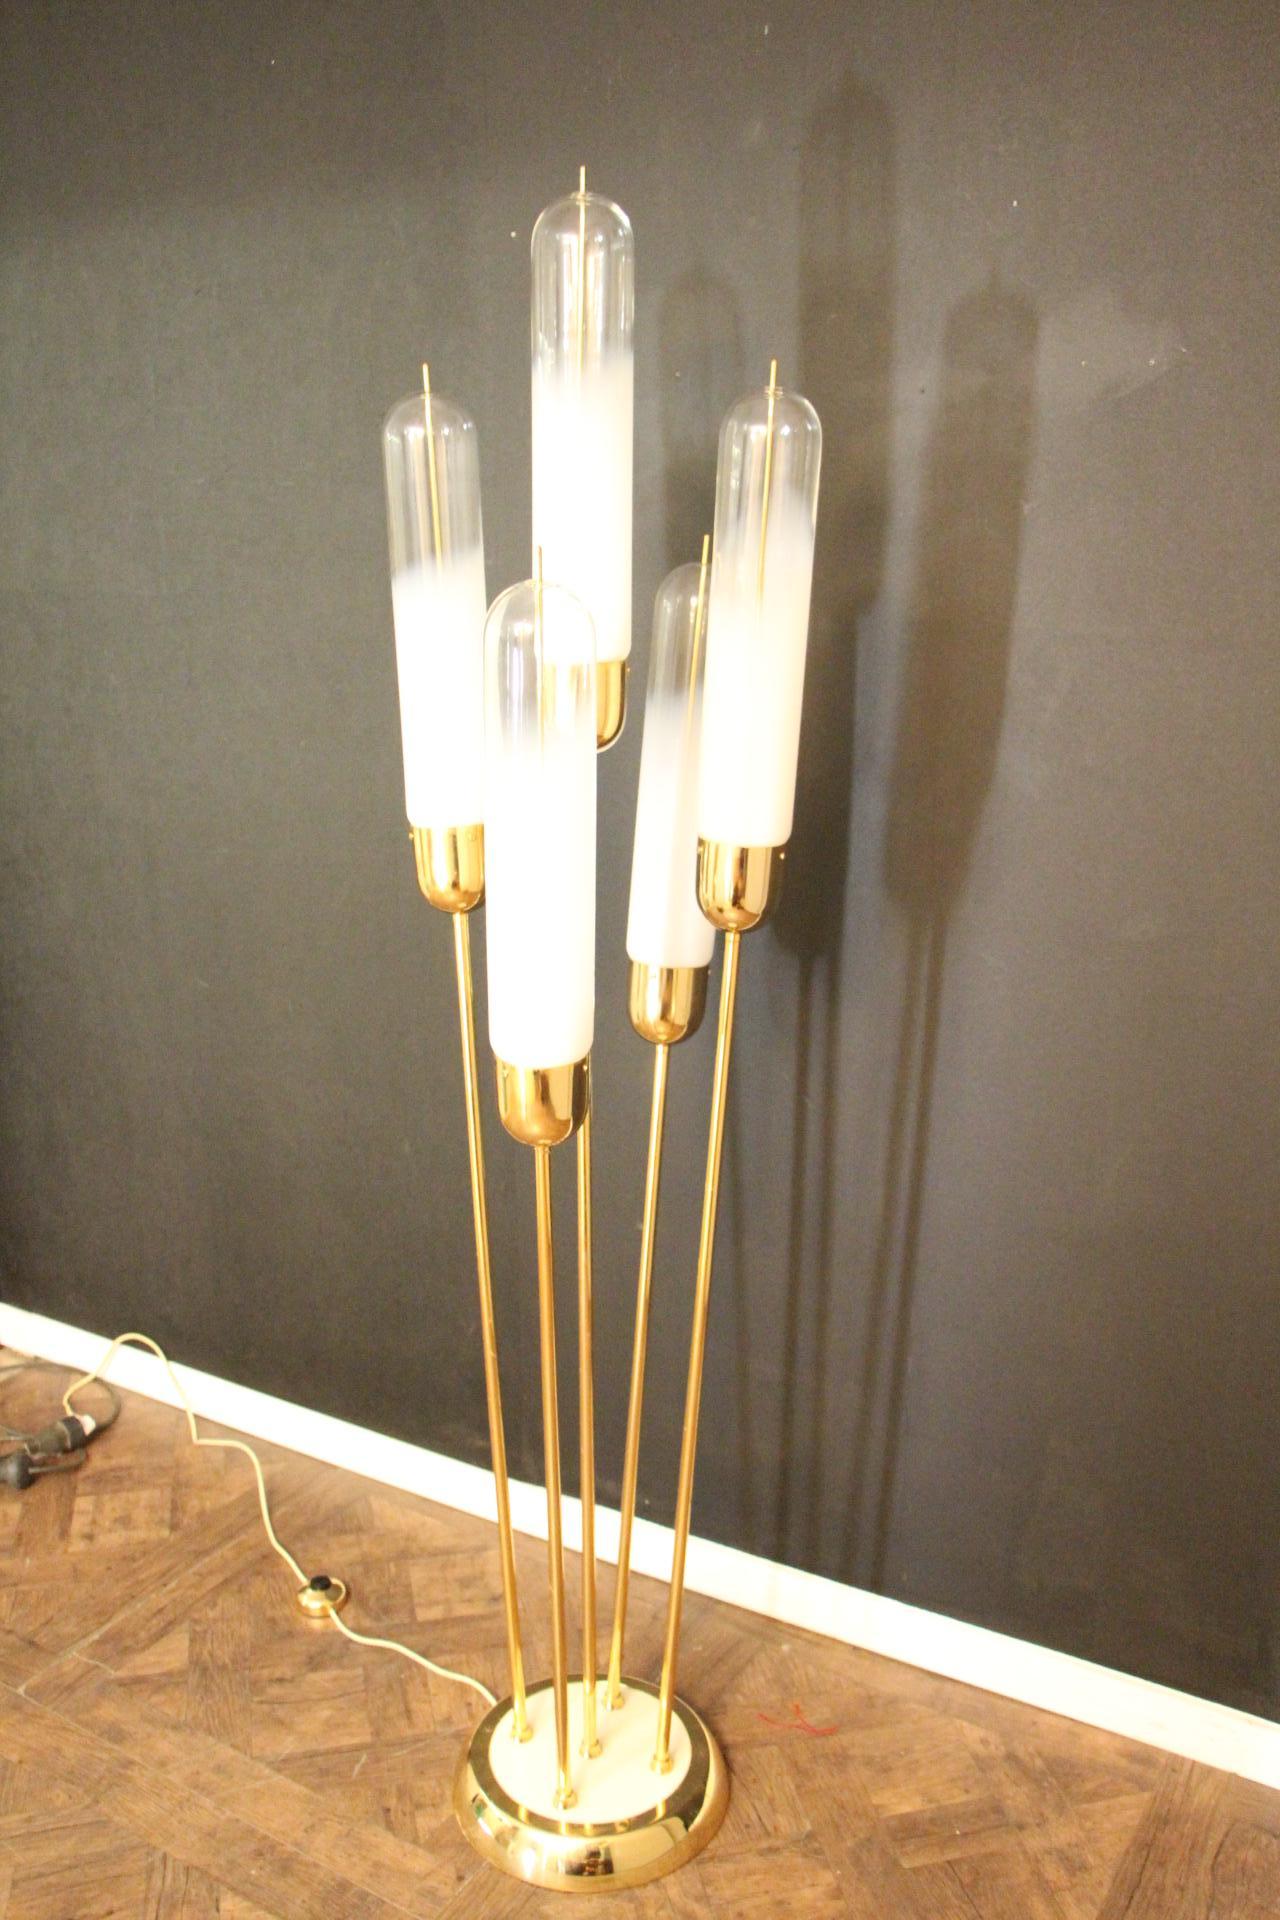 This five-armed large Mid-Century Modern floor lamp was
designed by Carlo Nason for Mazzega in 1970's. It was made in Italy. 
It is very rare because it is brass plated and its base is beige and gloden.
Its shades are in mouth blown Murano glass